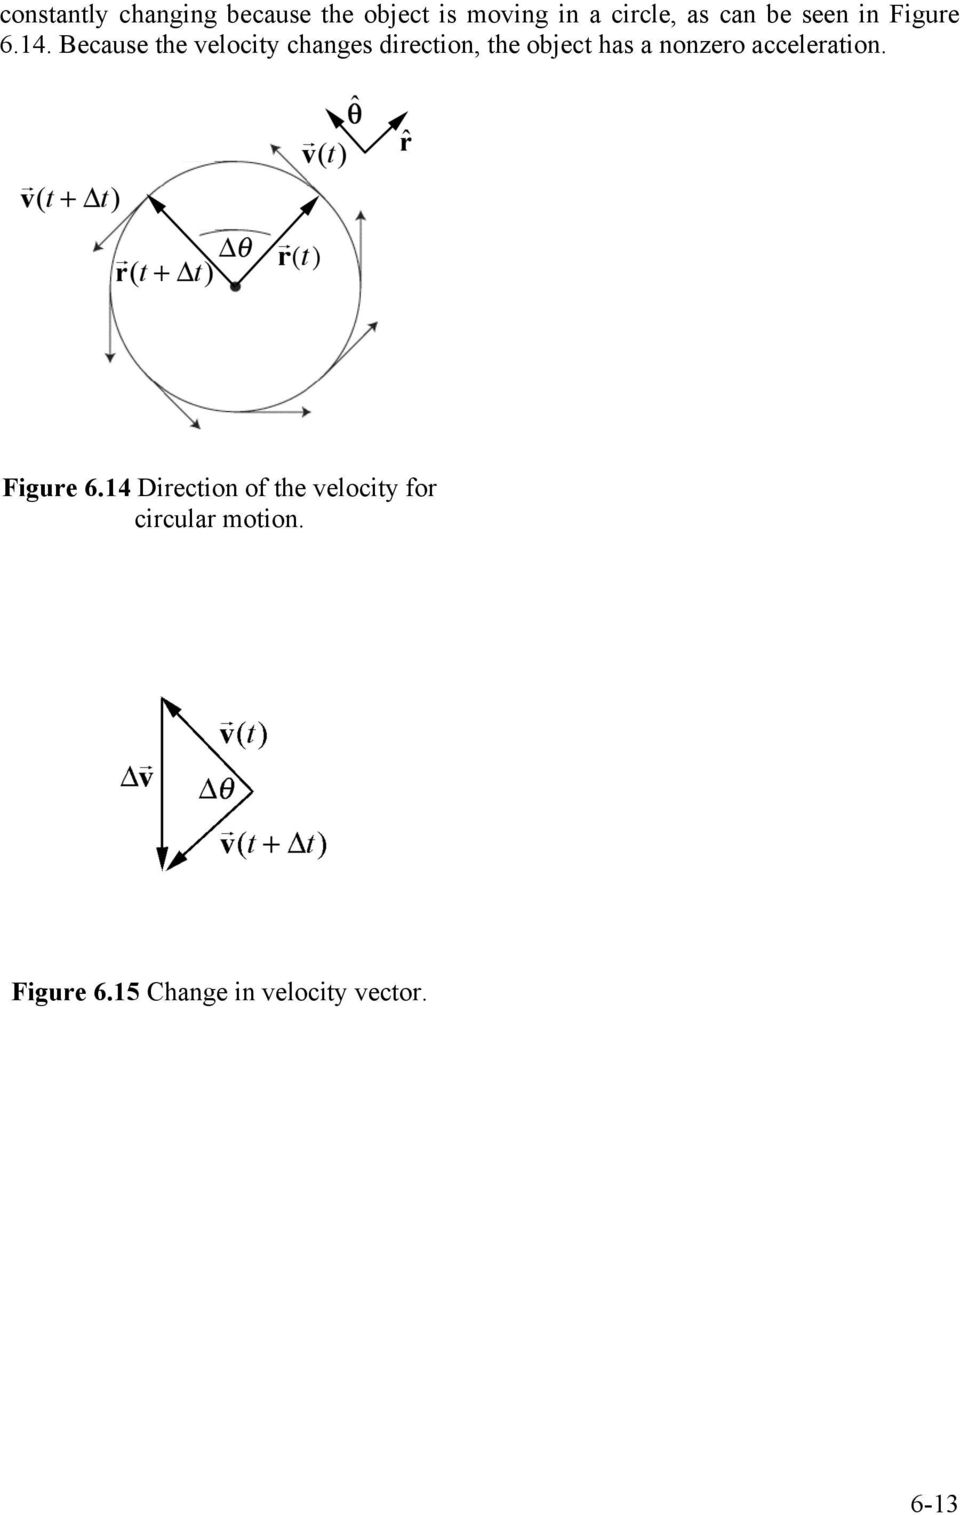 Because the velocity changes direction, the object has a nonzero